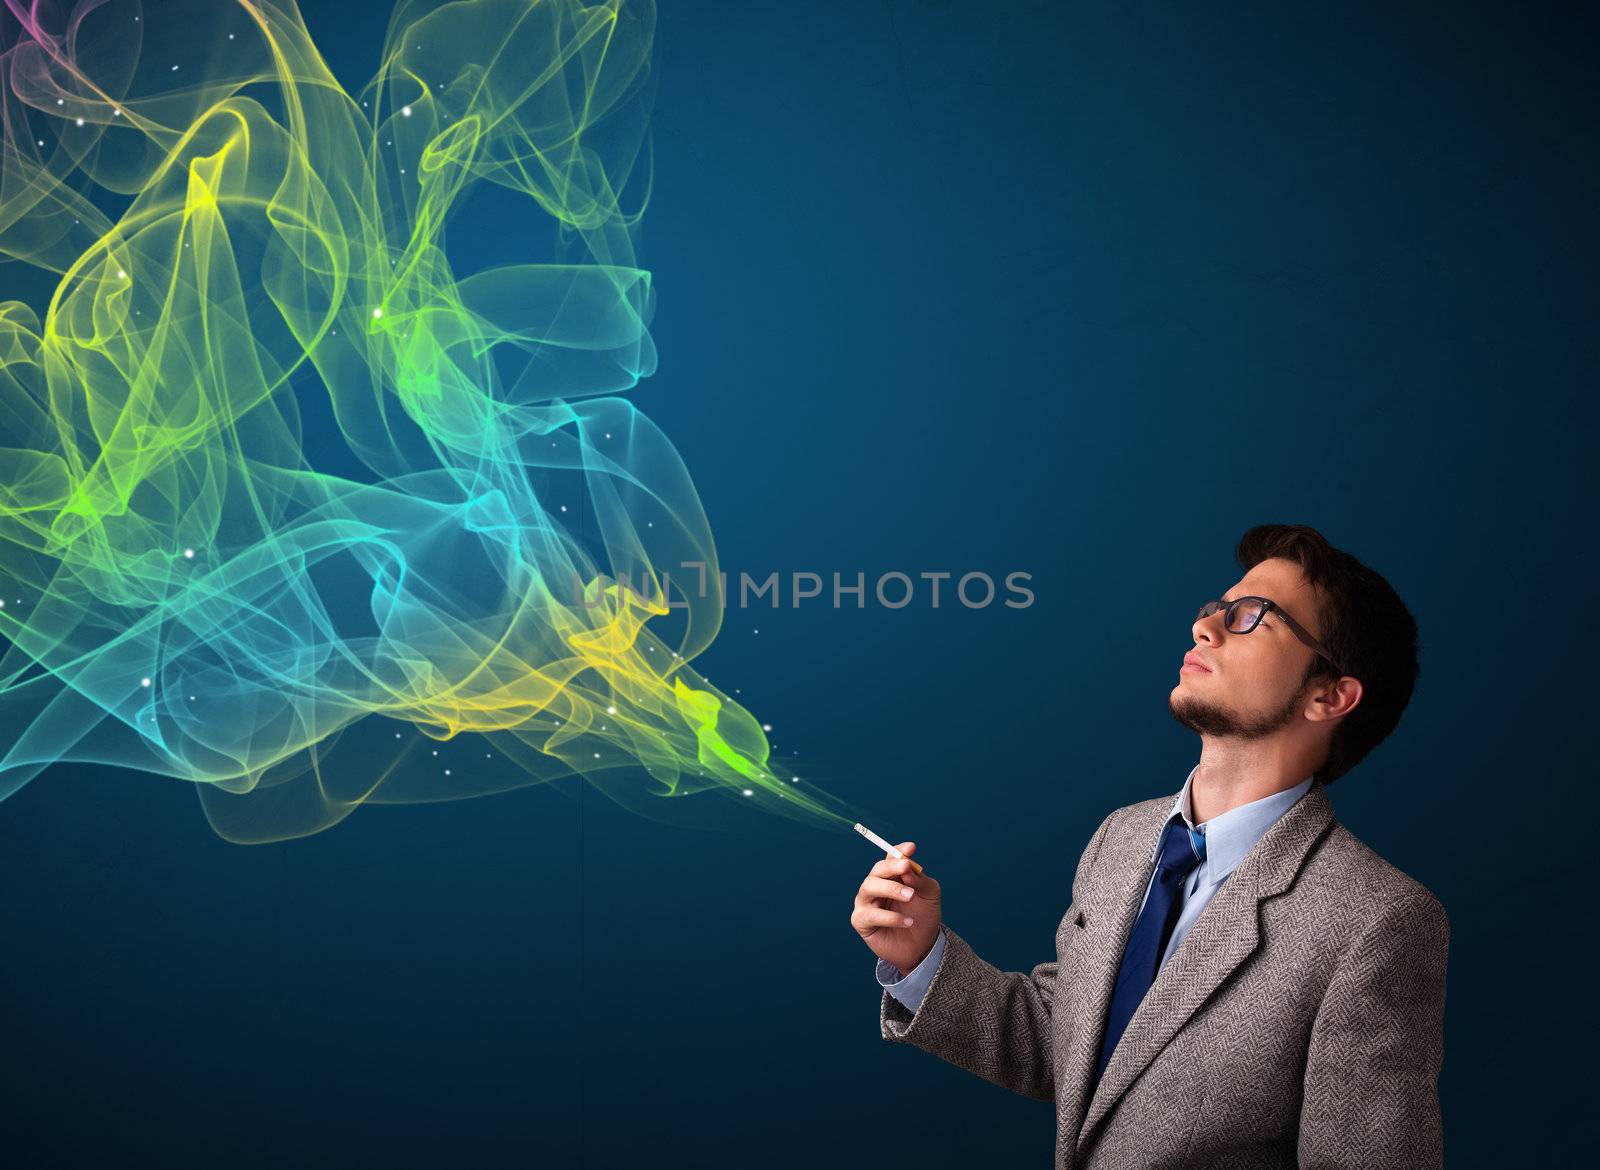 Handsome young man smoking cigarette with colorful smoke